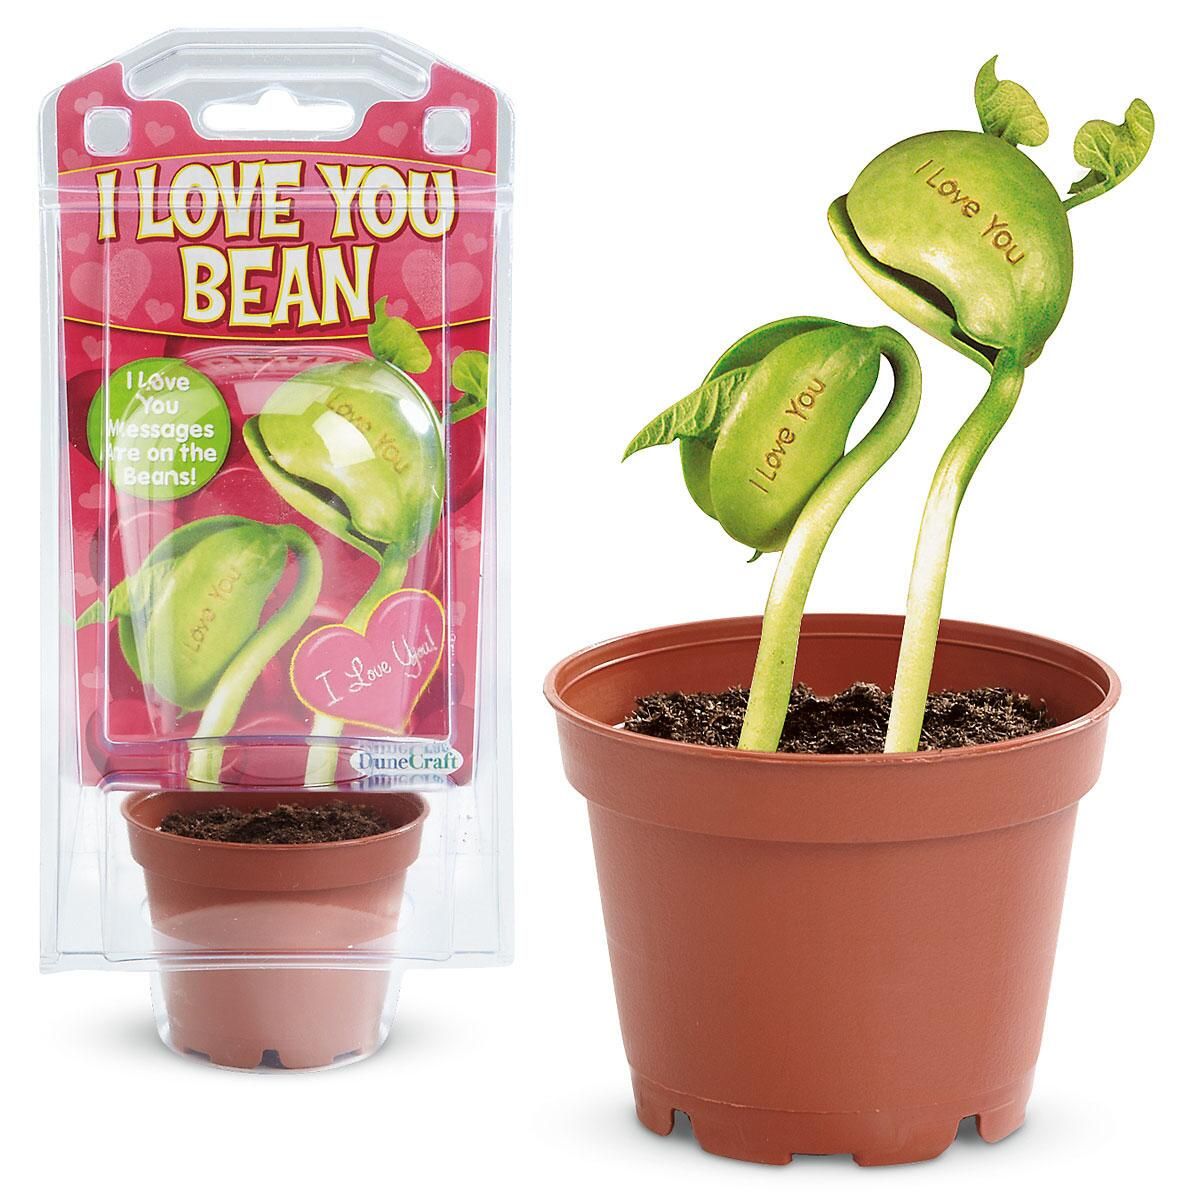 magic bean seeds gift plant growing message word